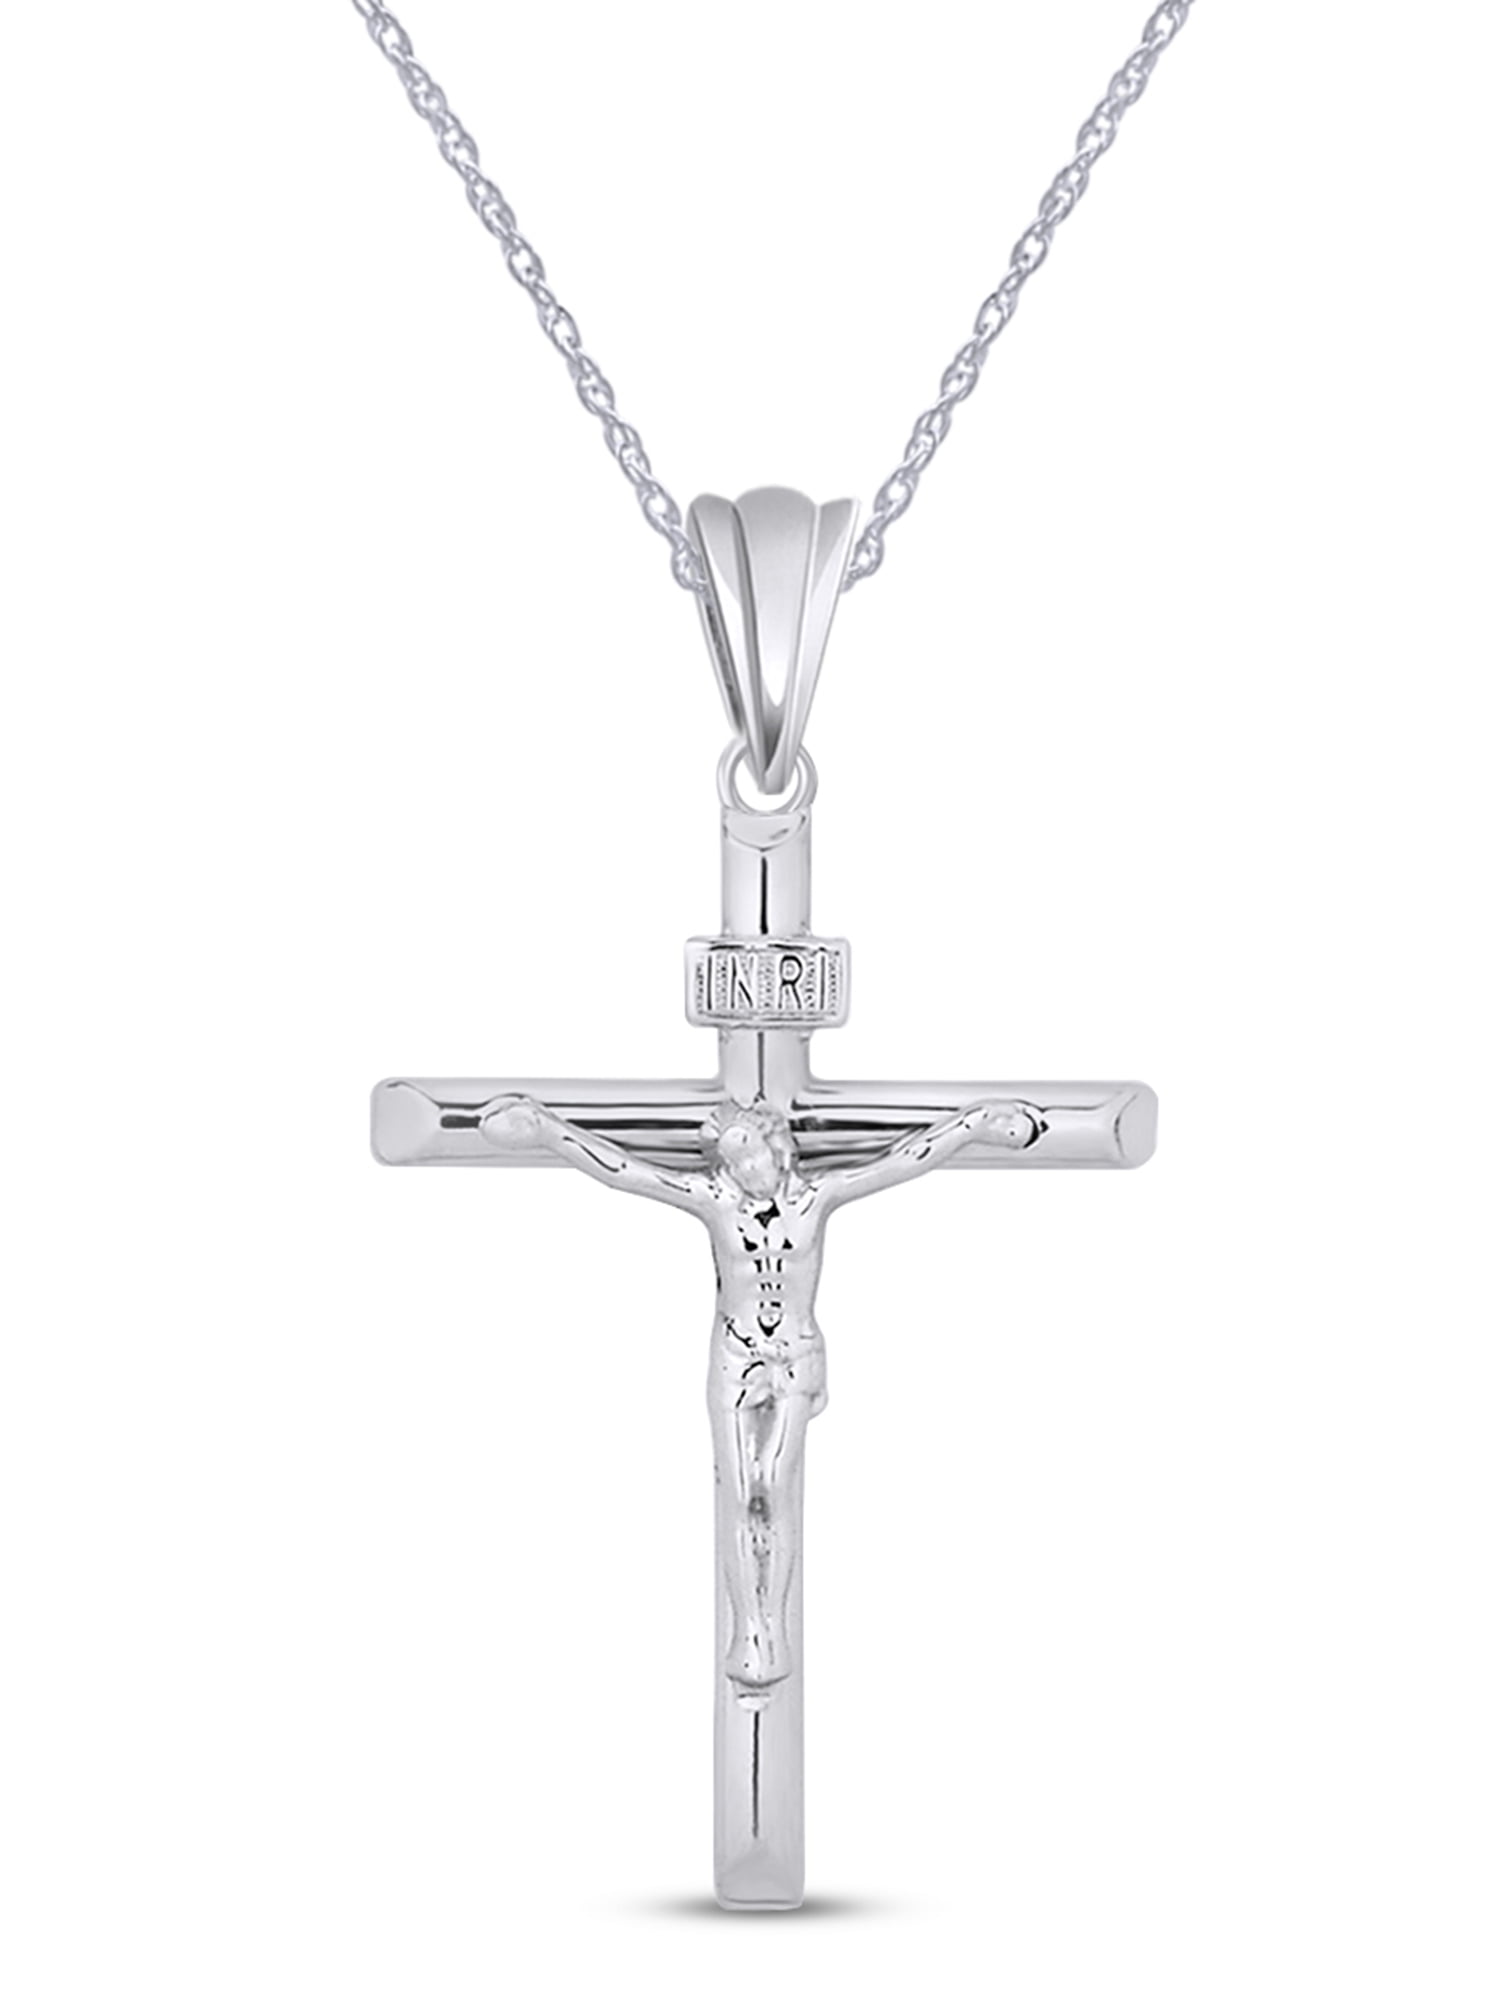 10pcs/lot Charms Cross Antique Silver Color Jesus Cross Pendant Charms Nail Cross  Charms For Jewelry Making - Price history & Review, AliExpress Seller -  Irelia Official Store